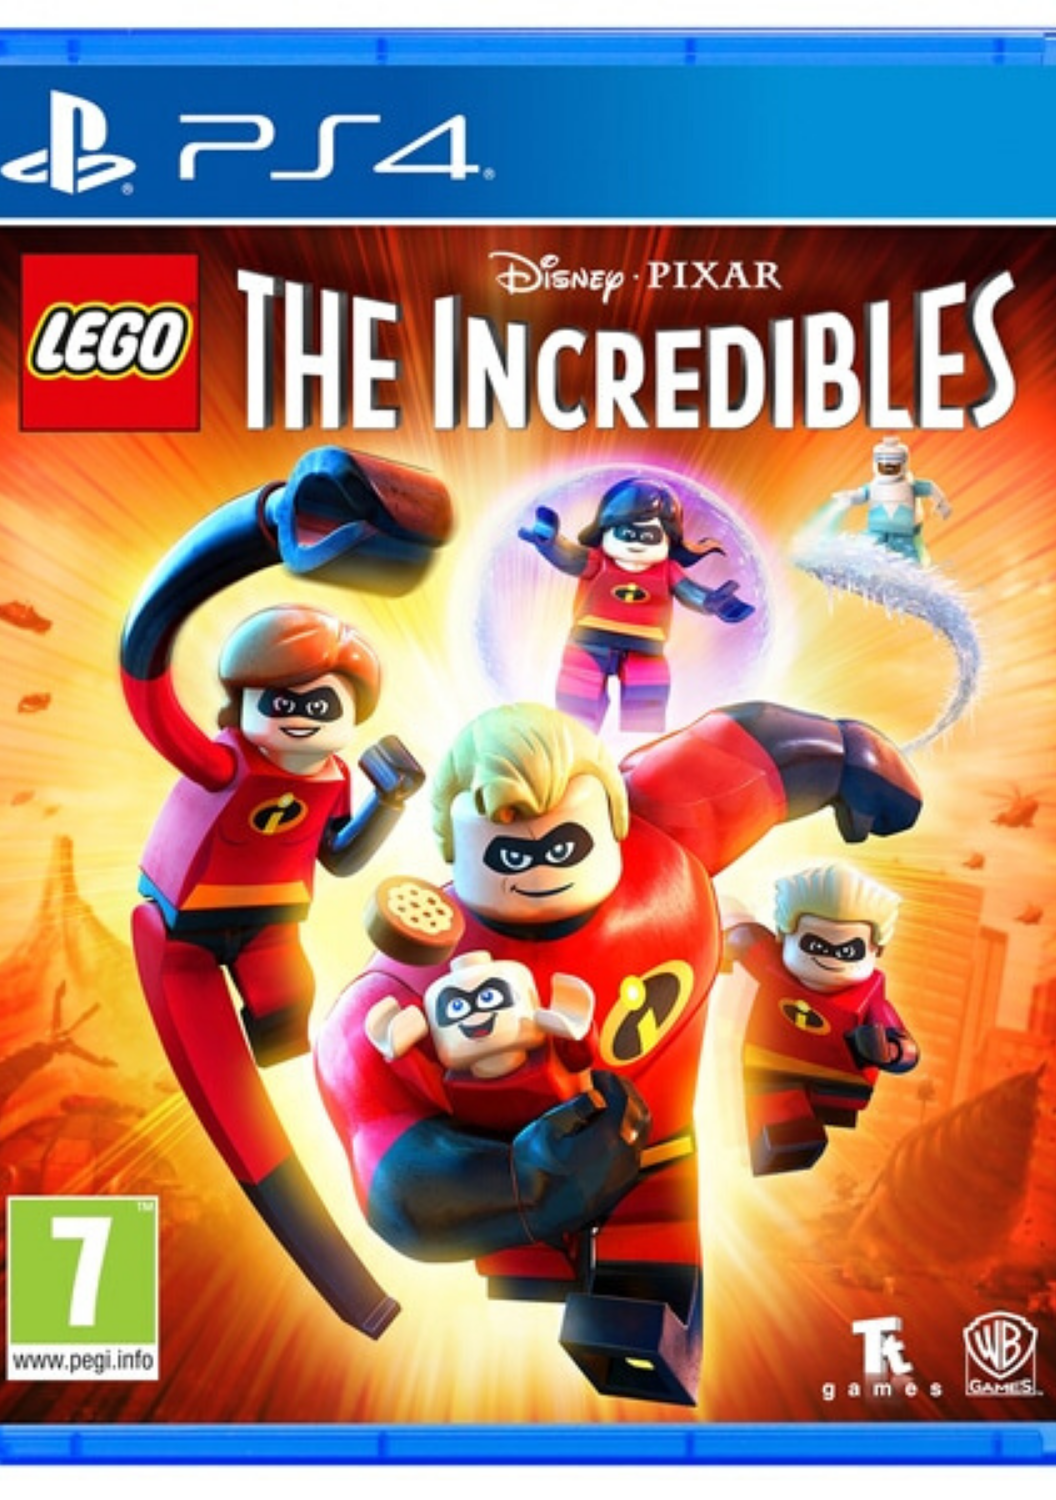 01) LEGO THE INCREDIBLES.png